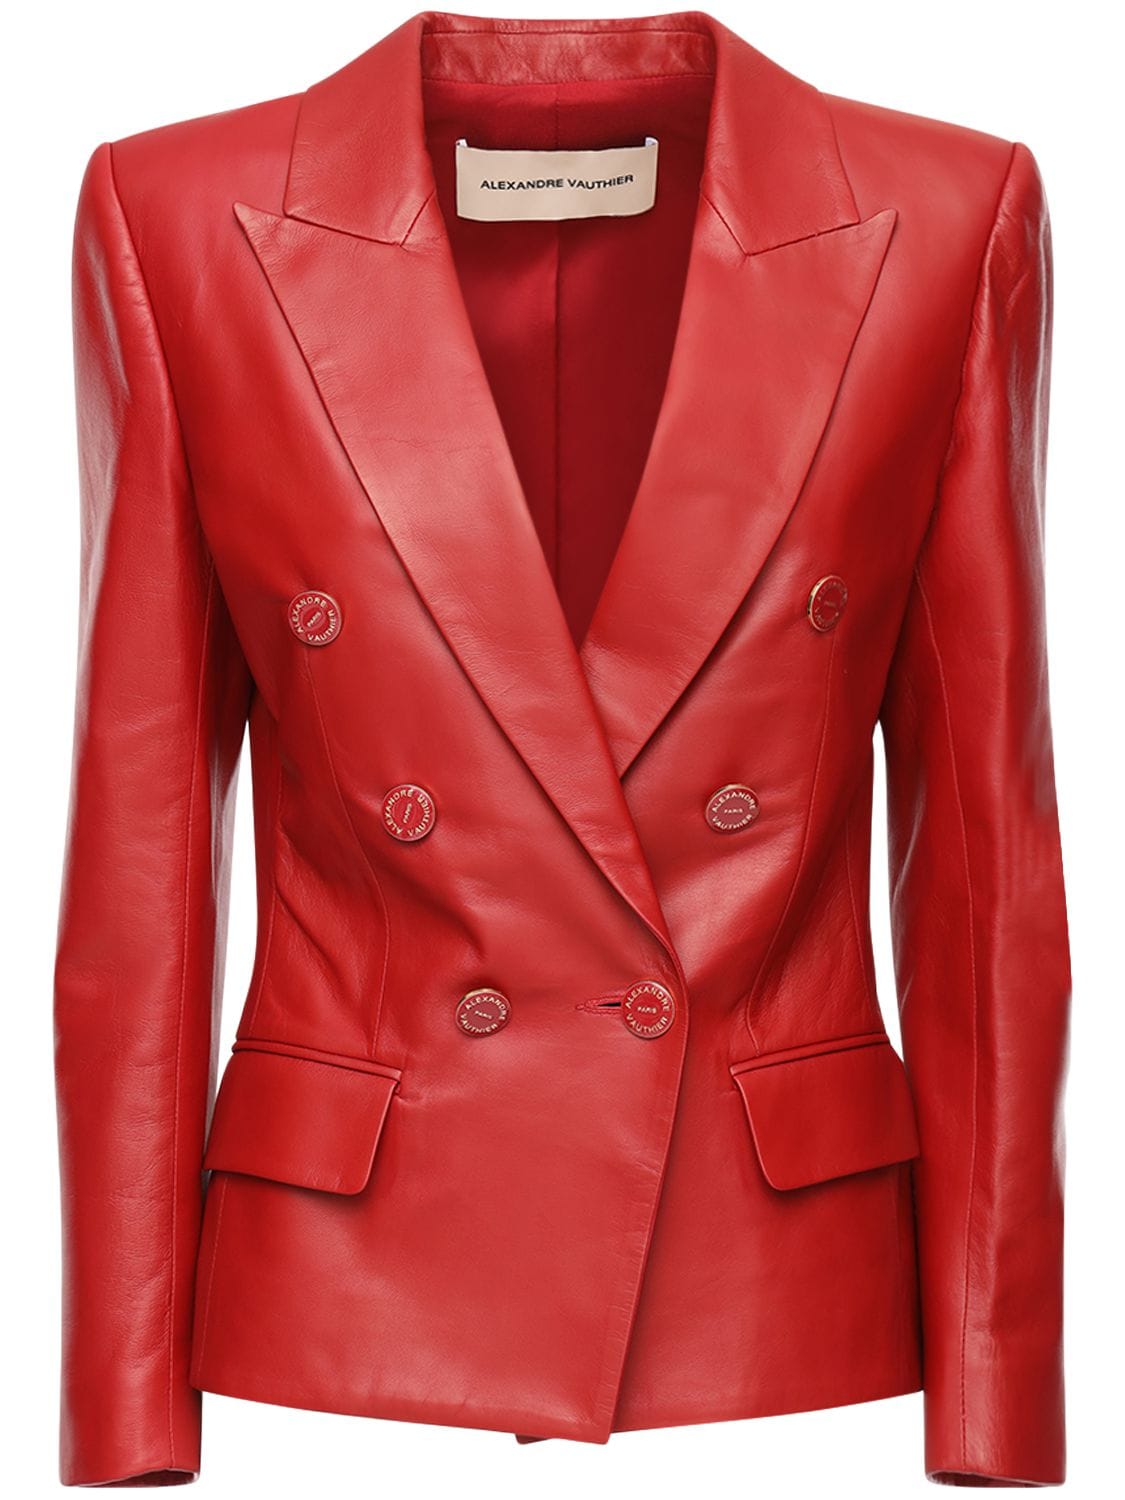 ALEXANDRE VAUTHIER DOUBLE BREASTED LEATHER BLAZER,72I5BH001-TEFDUVVFUG2